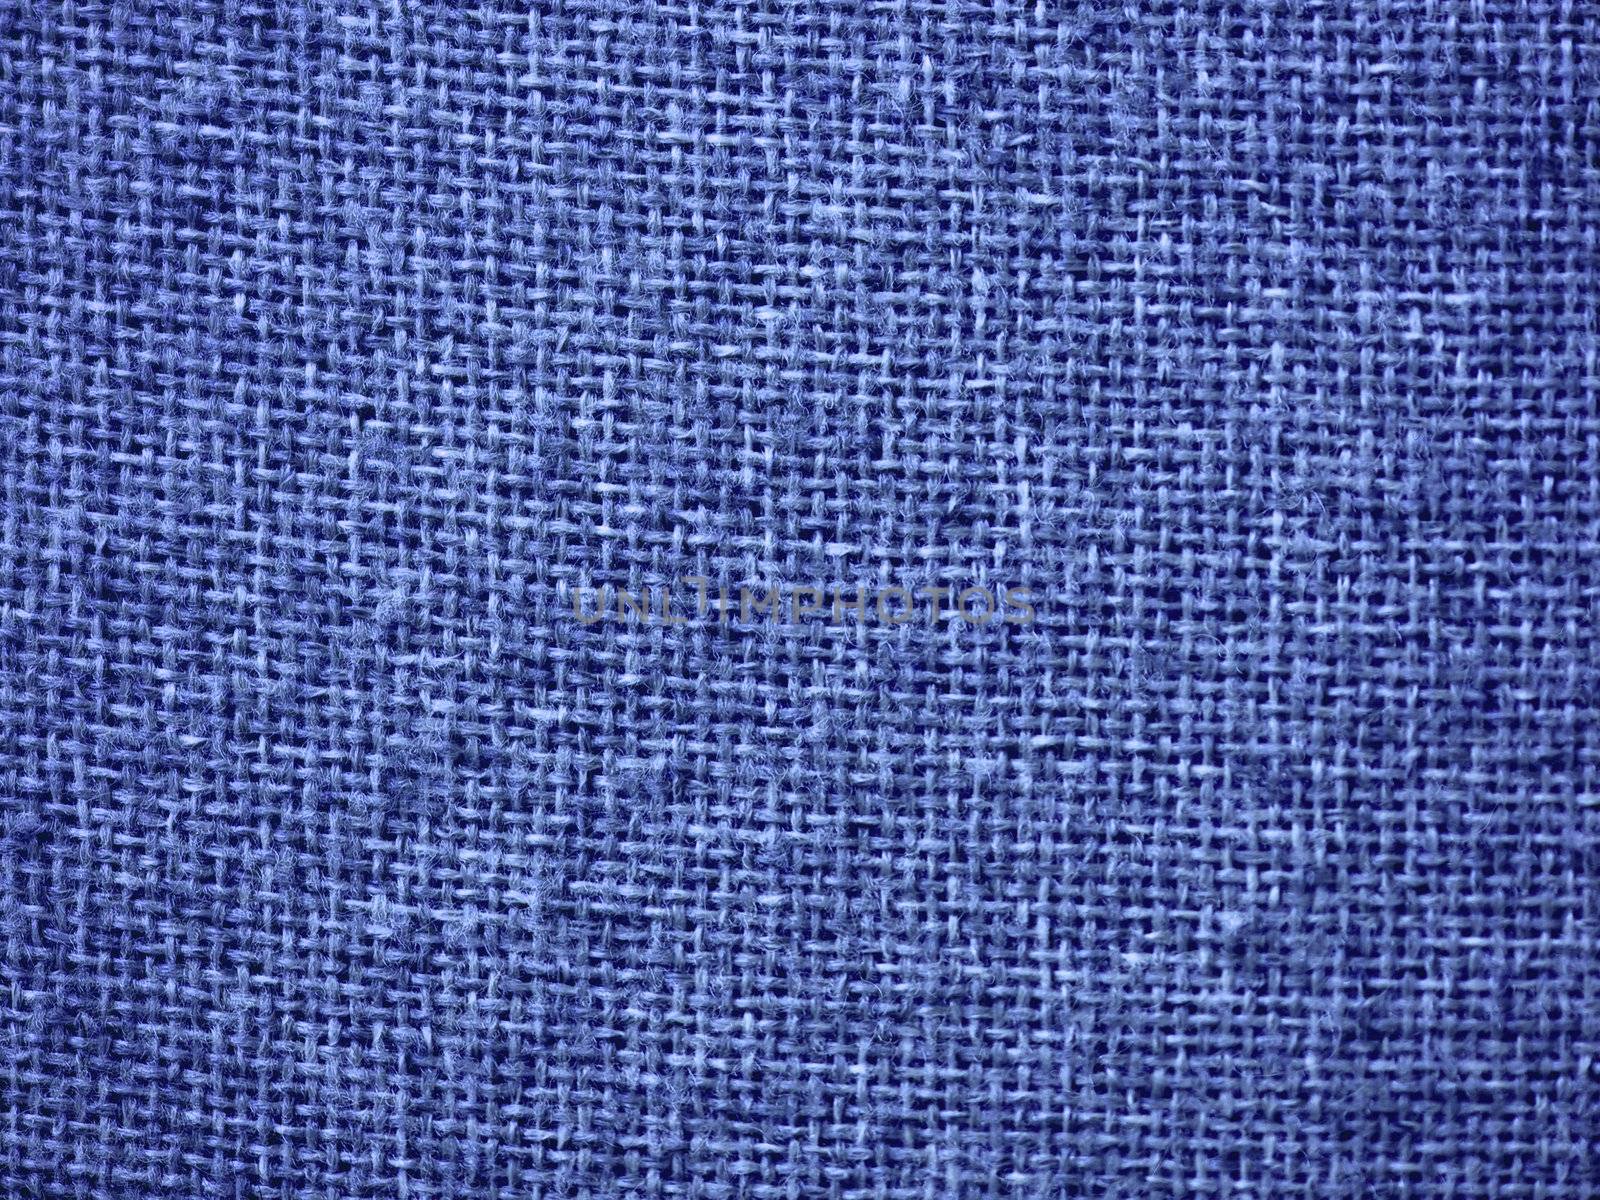 Blue burlap fabric closeup for texture and backgrounds